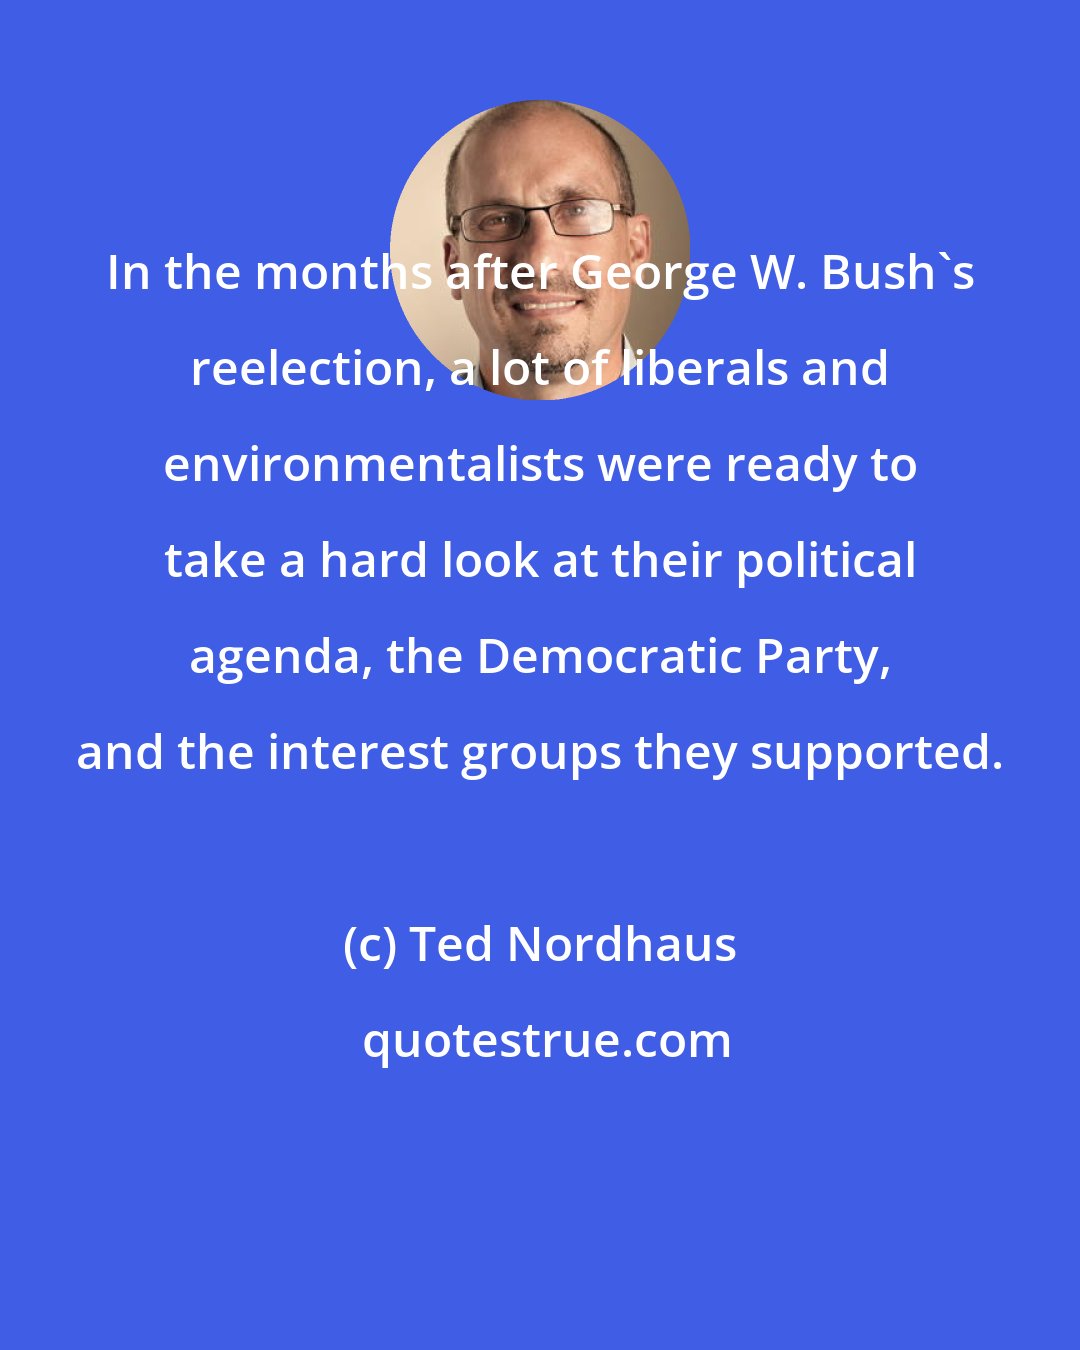 Ted Nordhaus: In the months after George W. Bush's reelection, a lot of liberals and environmentalists were ready to take a hard look at their political agenda, the Democratic Party, and the interest groups they supported.